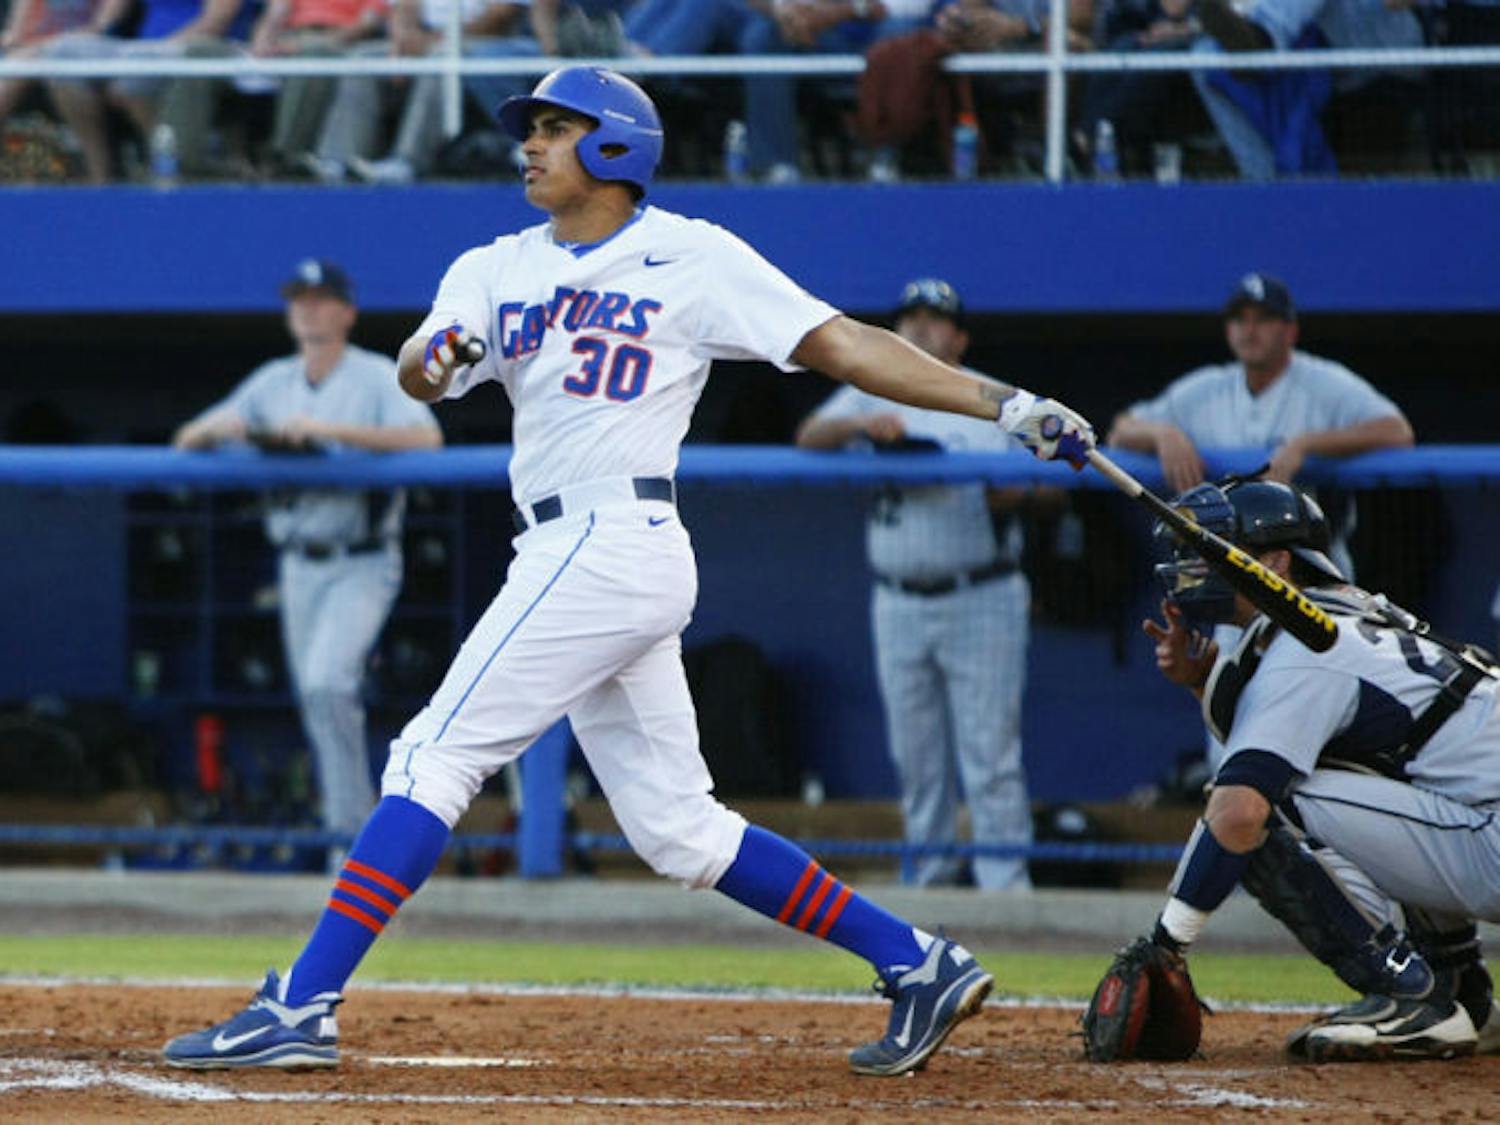 Senior Vickash Ramjit bats during Florida’s 8-2 win against Georgia Southern on Apr. 17, 2012, at McKethan Stadium. Ramjit, who has played both first base and outfield during his college career, will serve as a team captain for the Gators in 2013.
